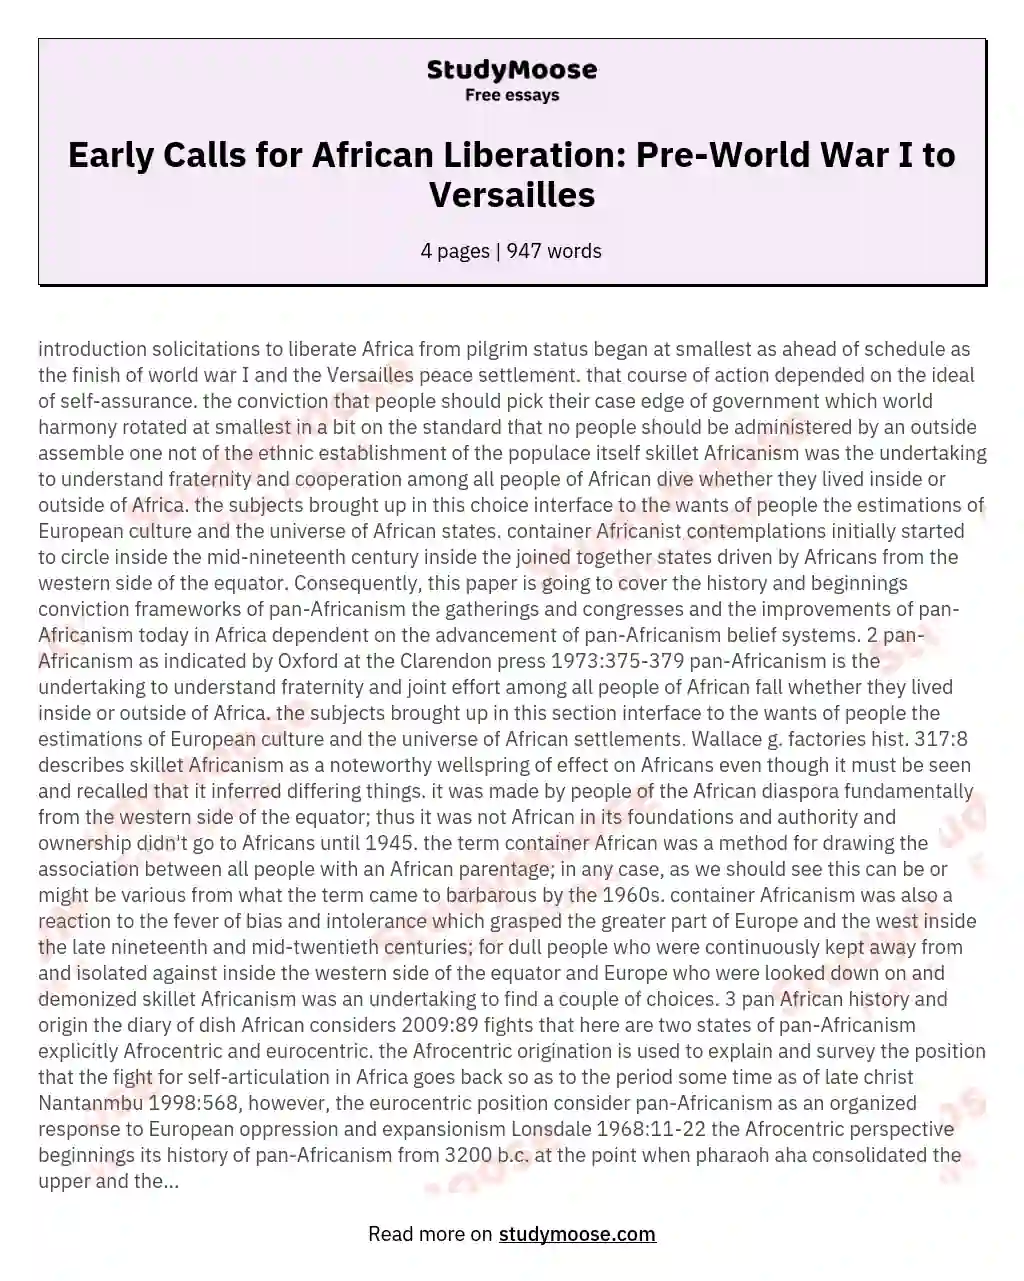 Early Calls for African Liberation: Pre-World War I to Versailles essay